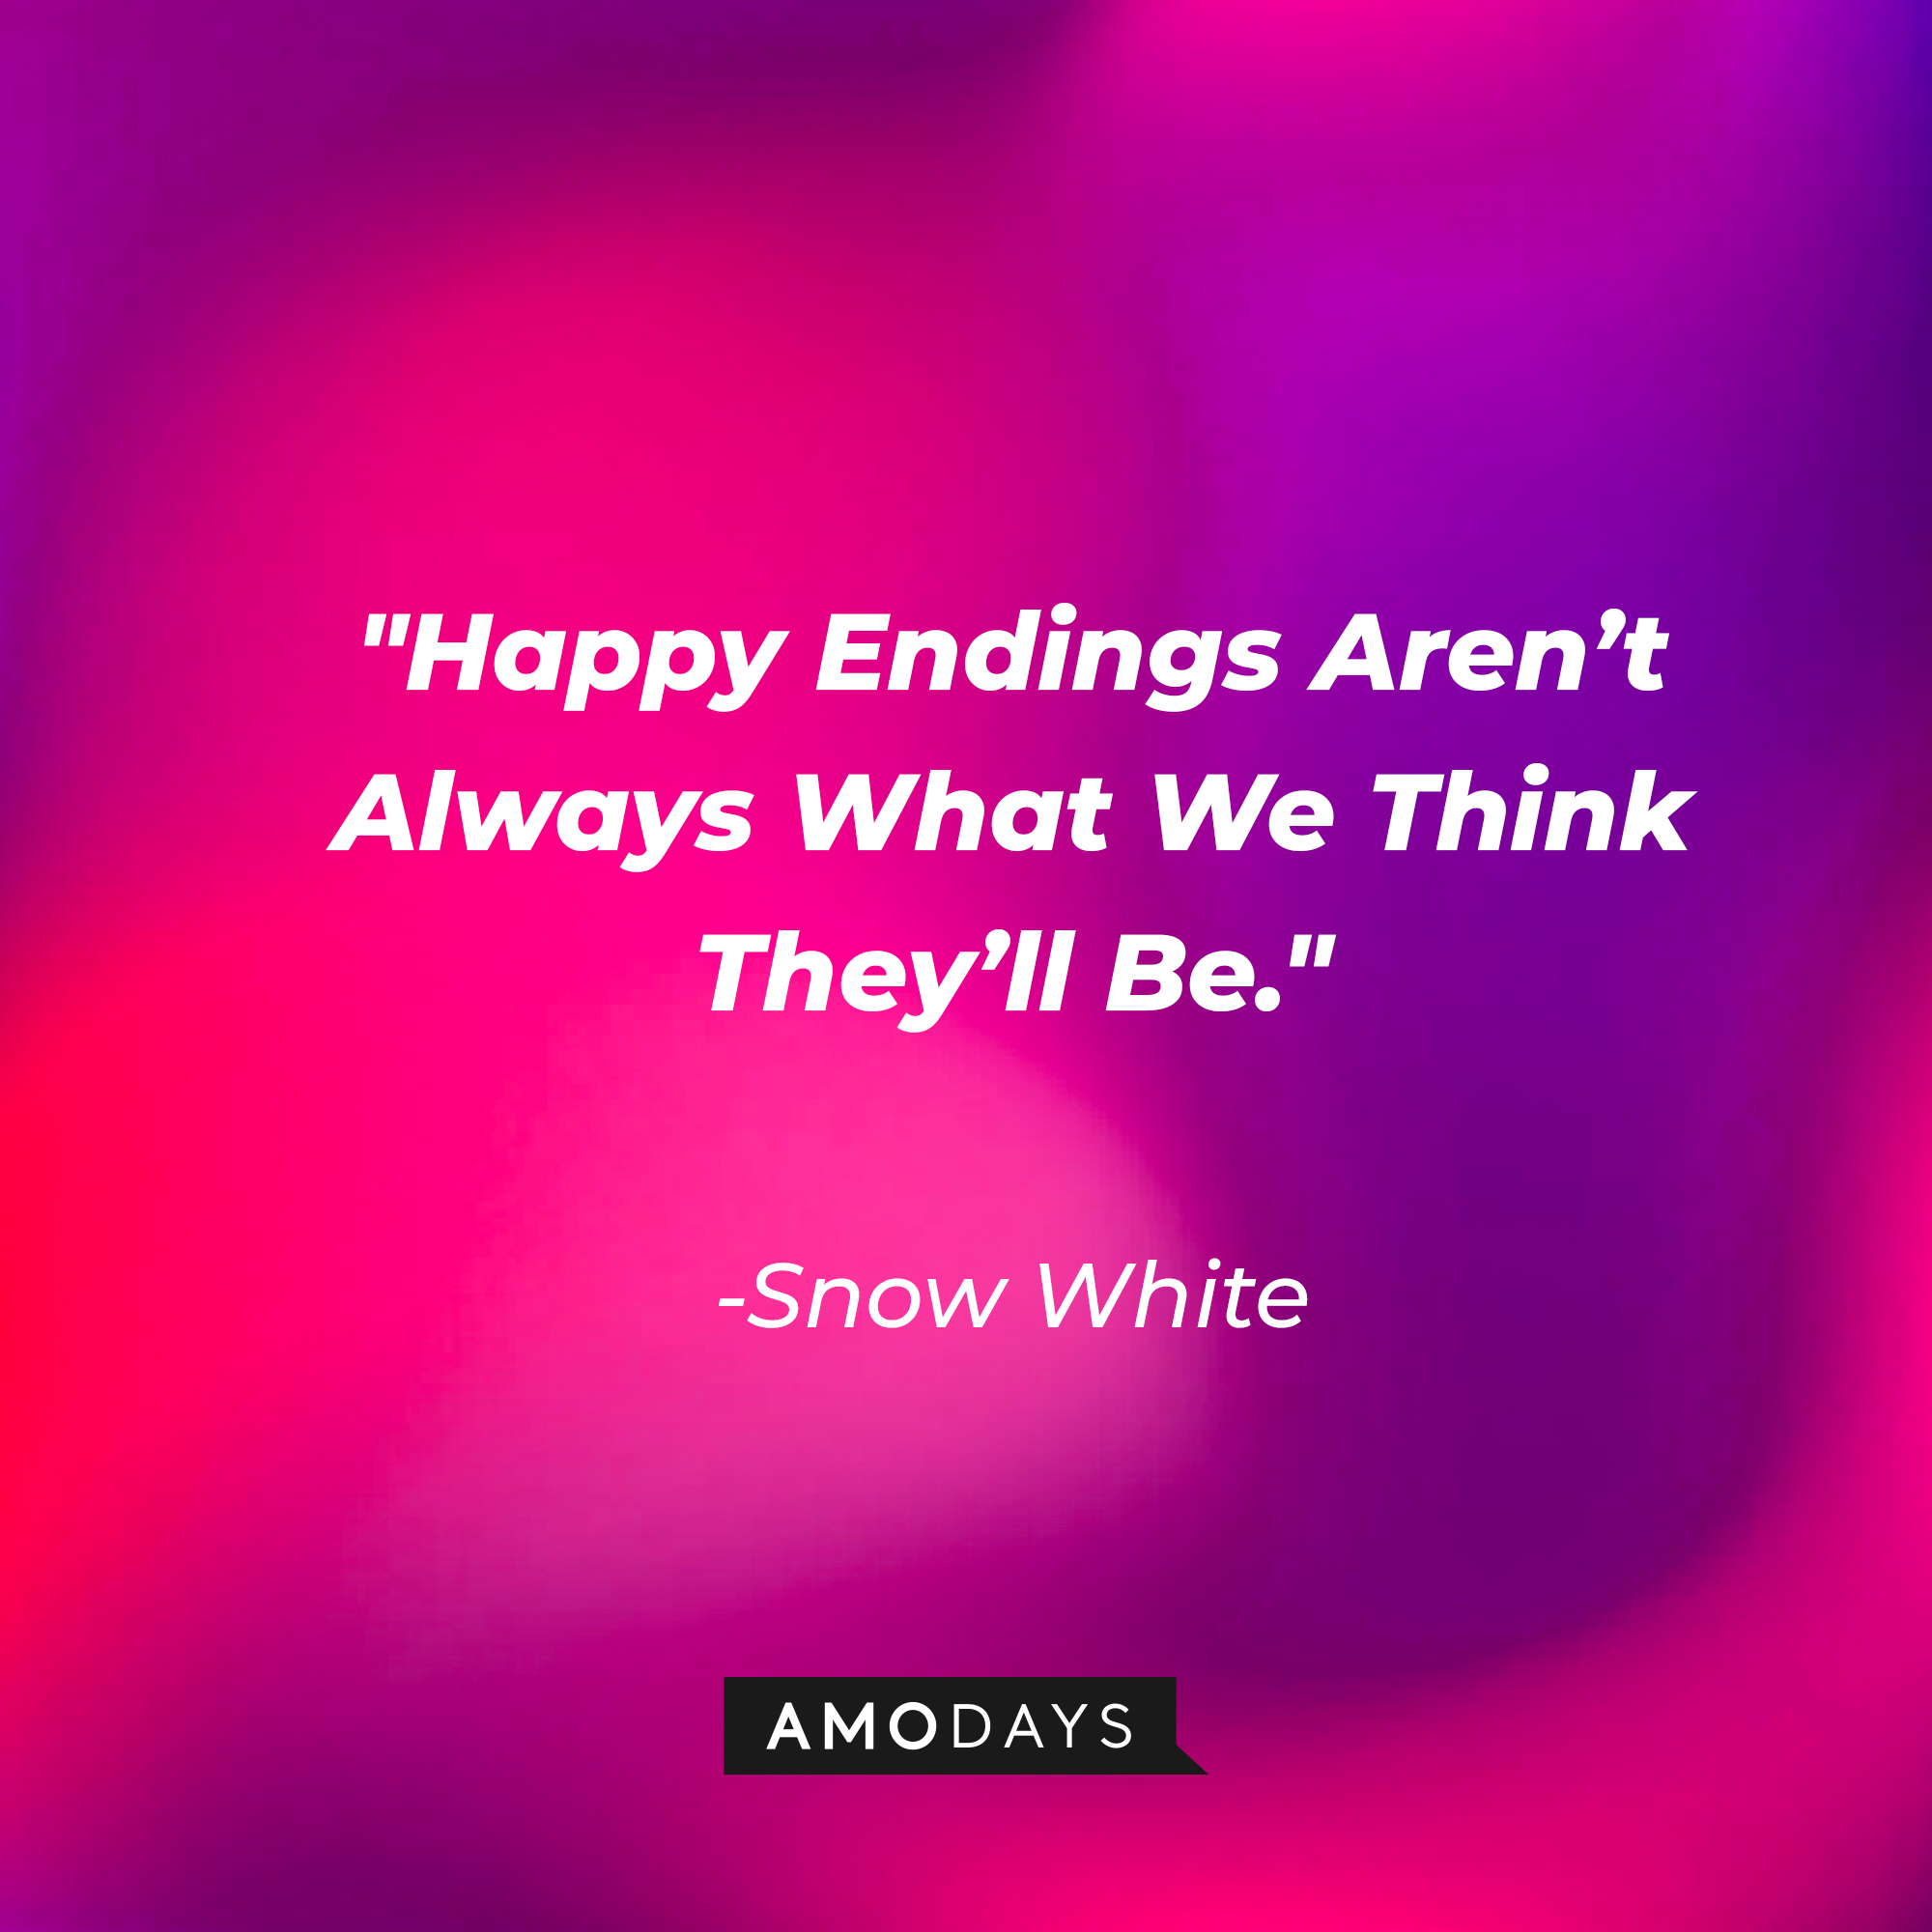 Snow White's quote: "Happy Endings Aren't Always What We Think They'll Be." | Source: Amodays